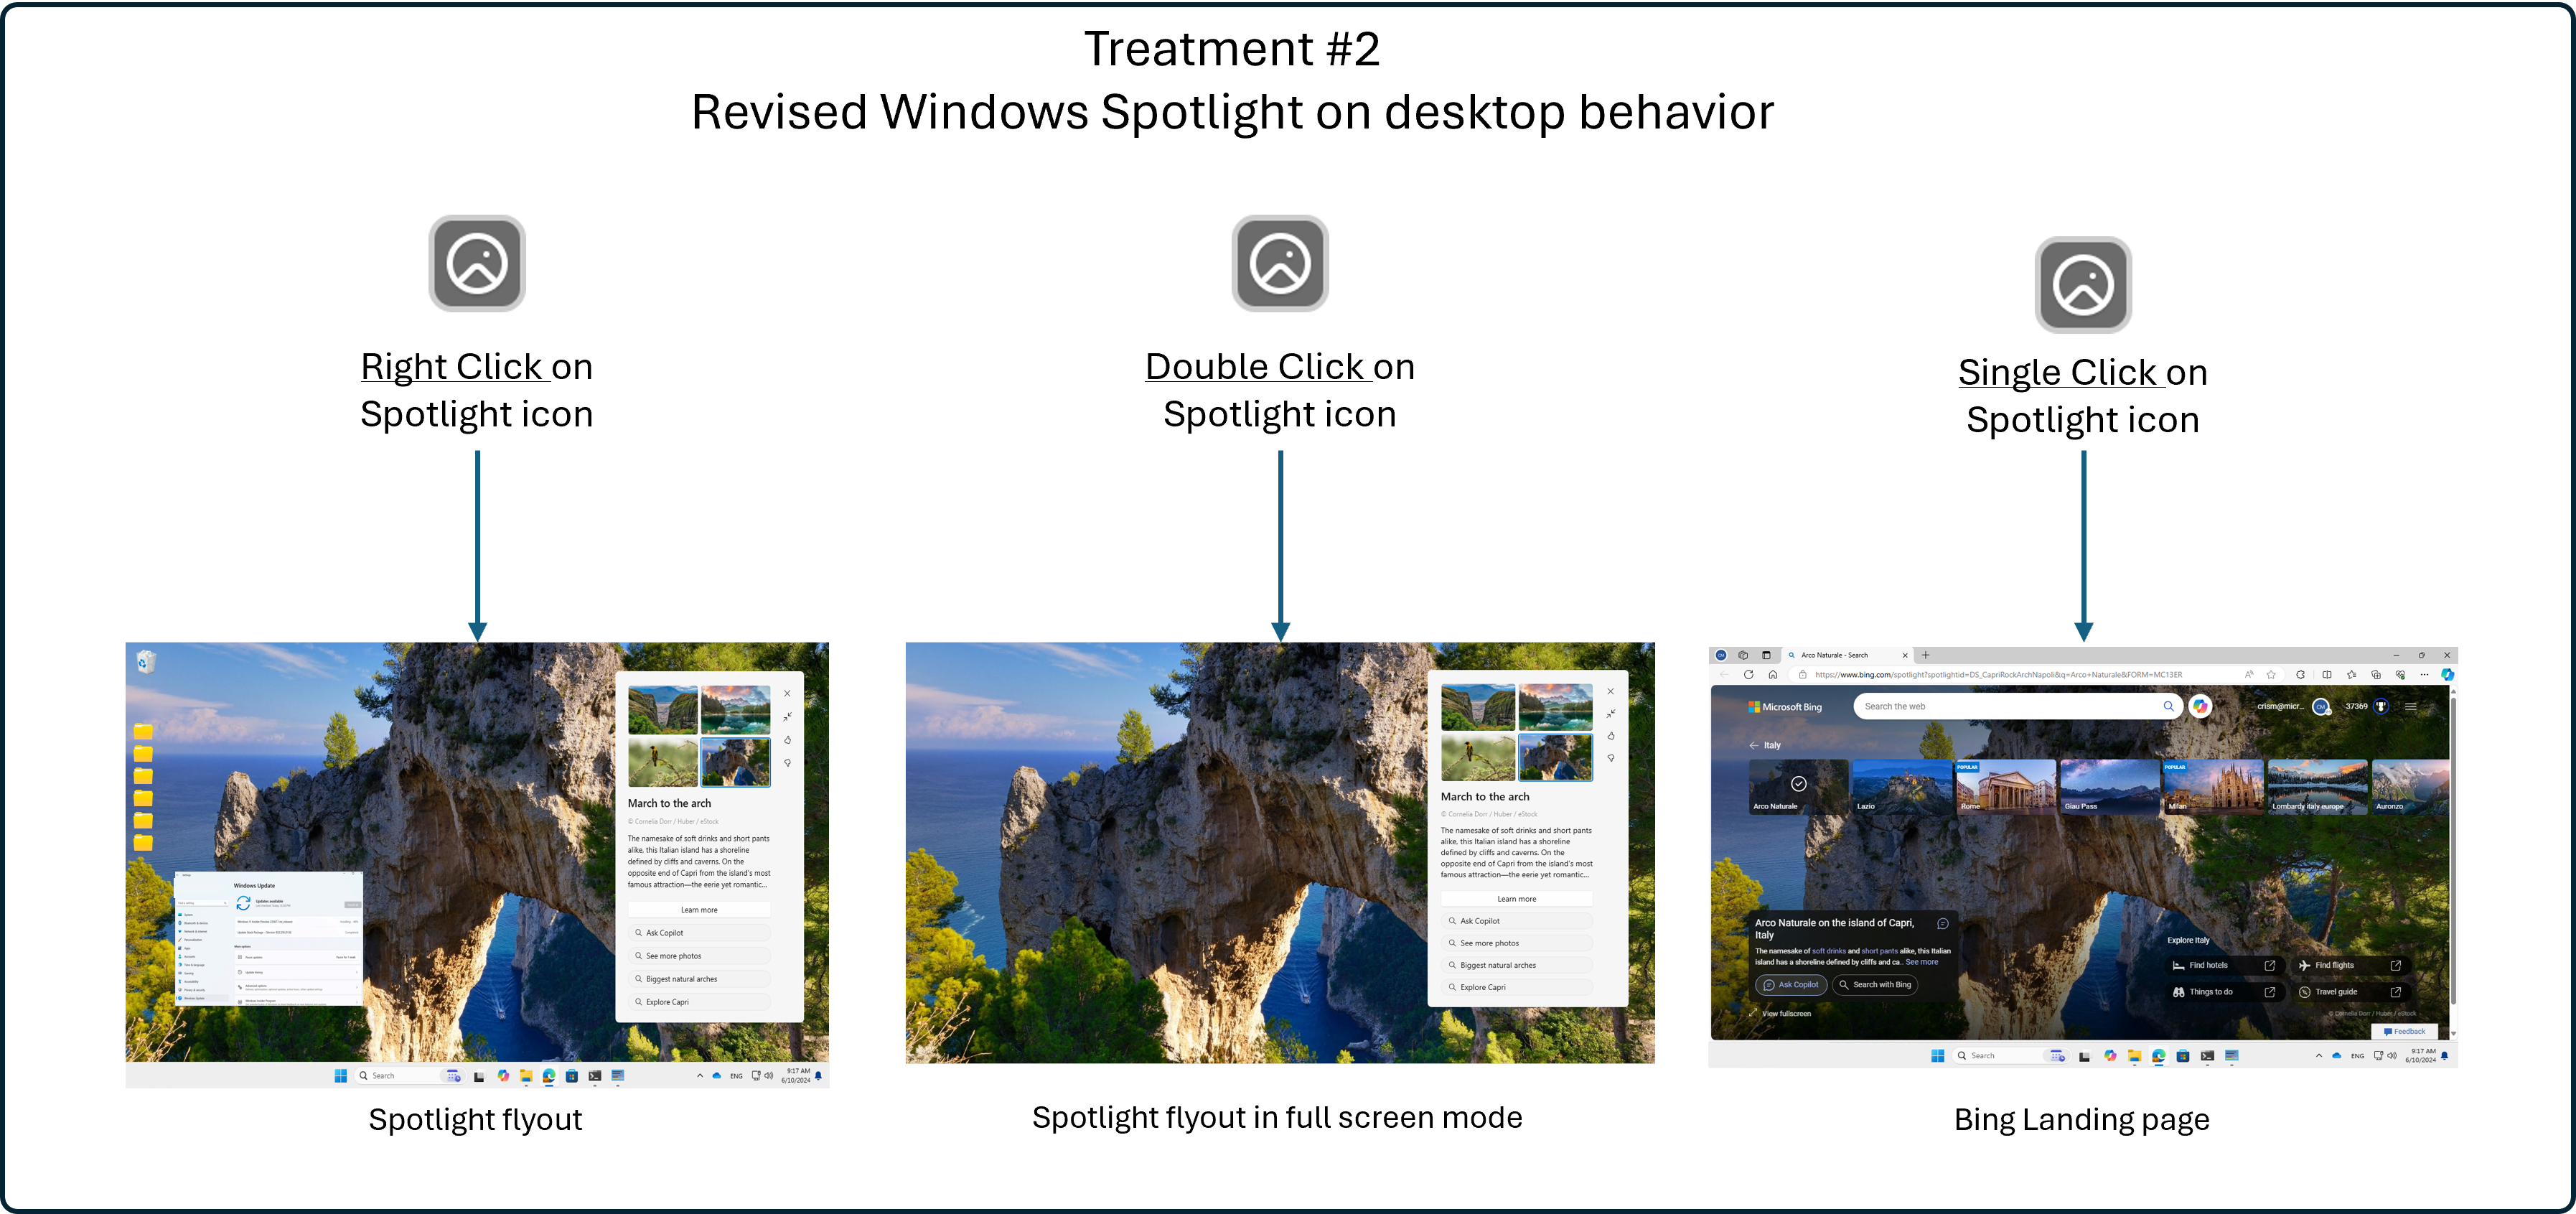 Treatment #2 – if a user right-clicks on the Windows Spotlight icon it will launch the Spotlight experience, while double-clicking will open Windows Spotlight experience in full screen mode. A single click on the Spotlight icon will open the Bing landing page for the image on desktop